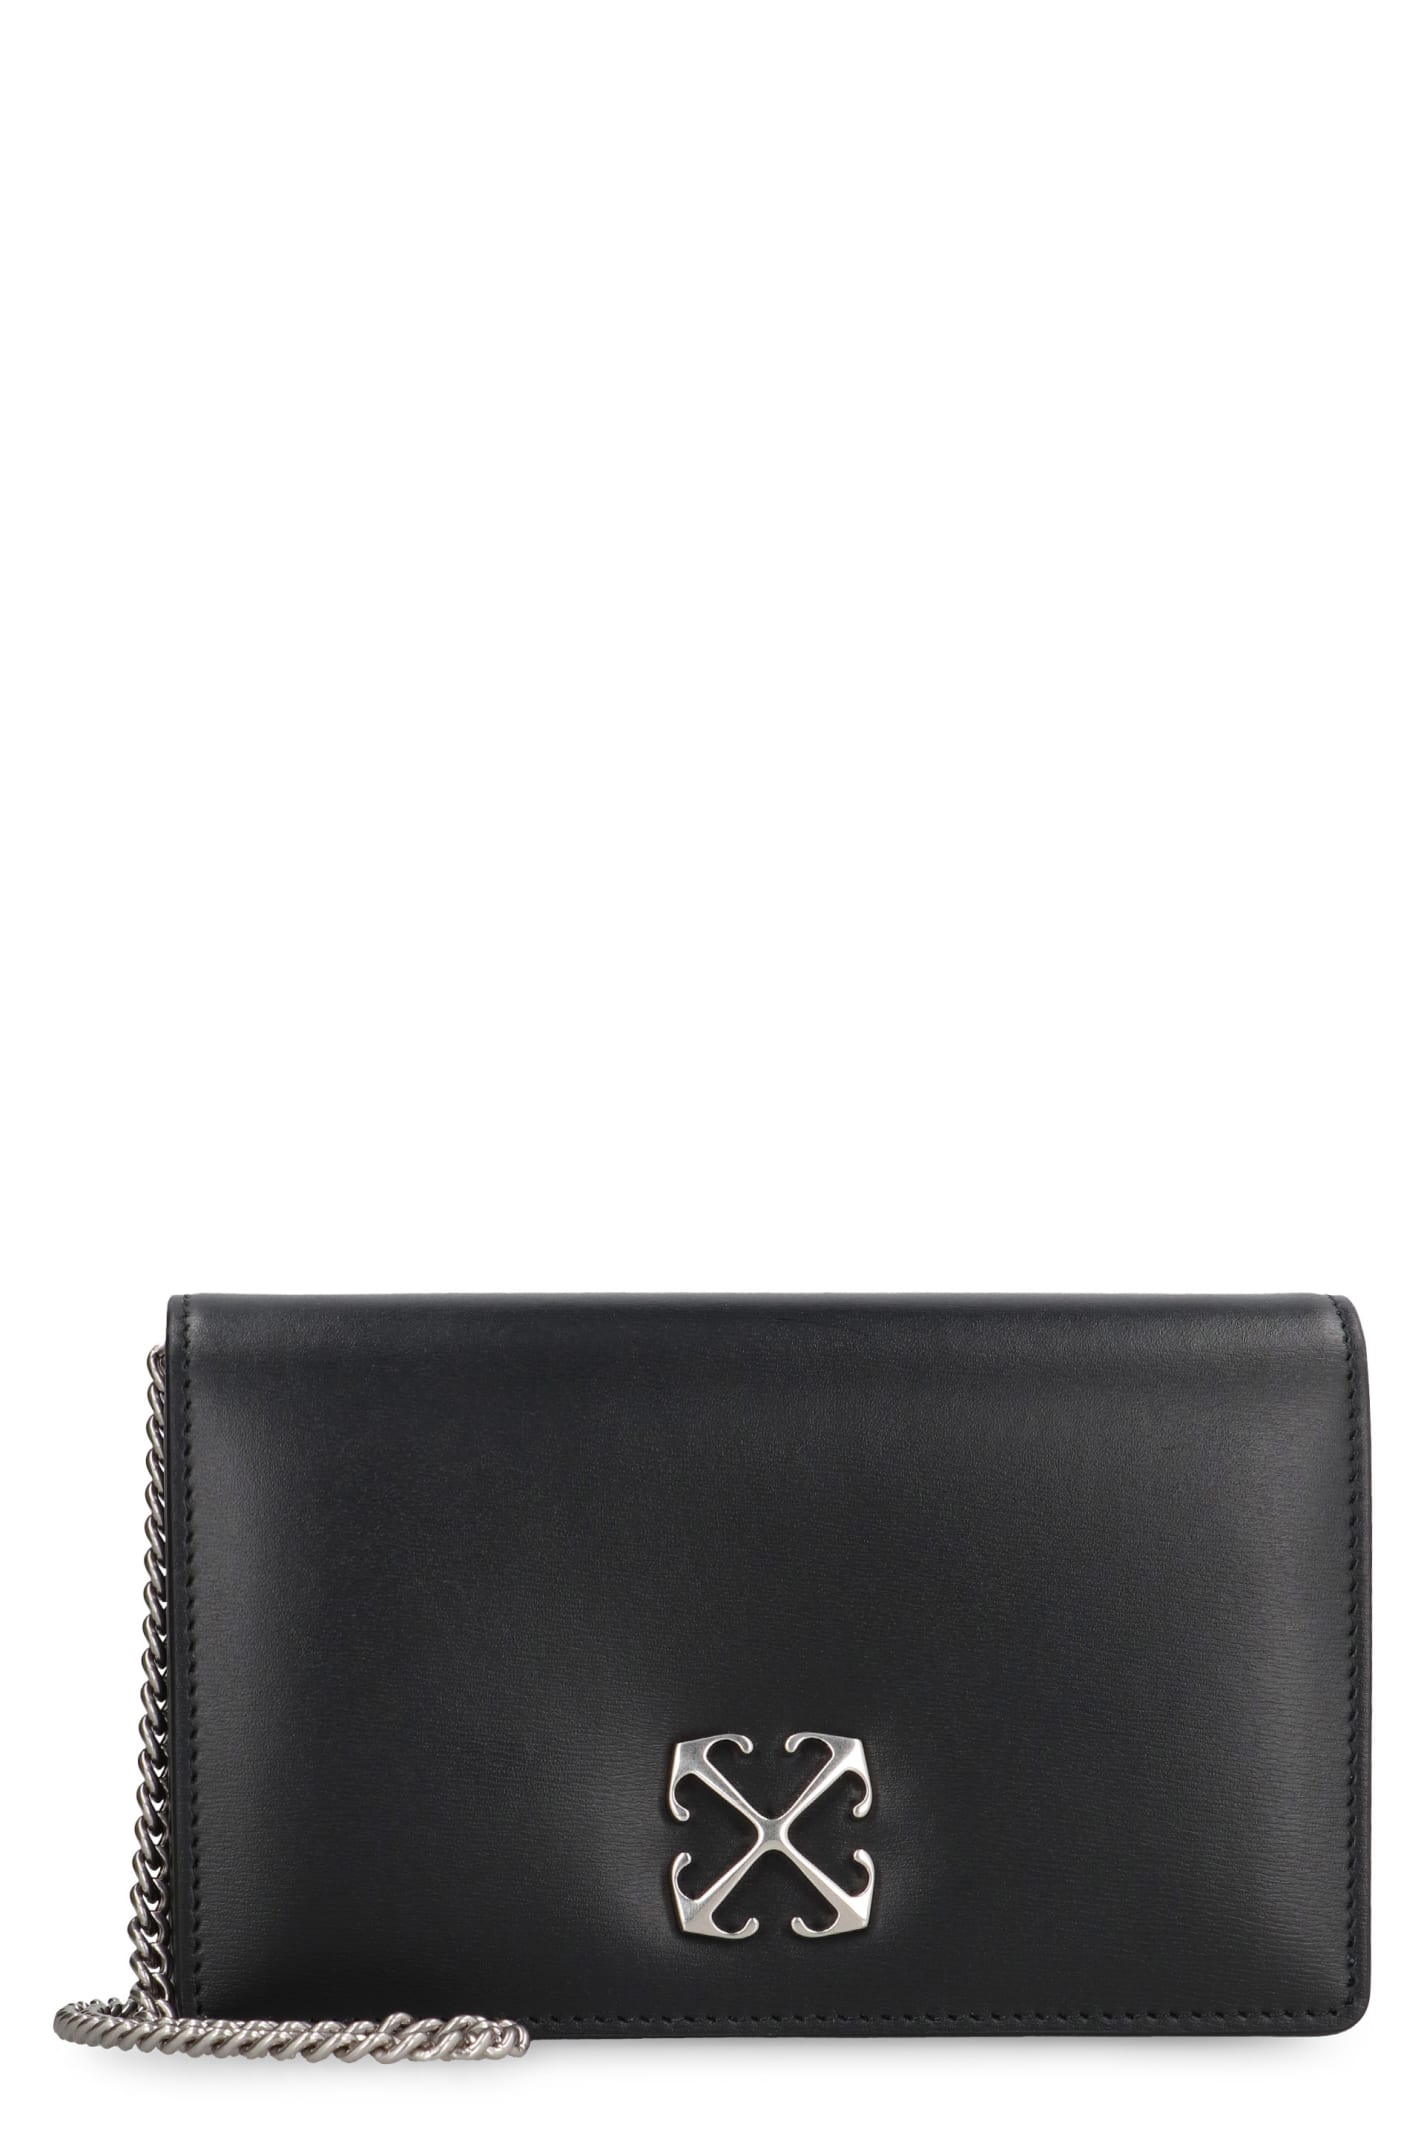 OFF-WHITE JITNEY 0.5 LEATHER WALLET ON CHAIN